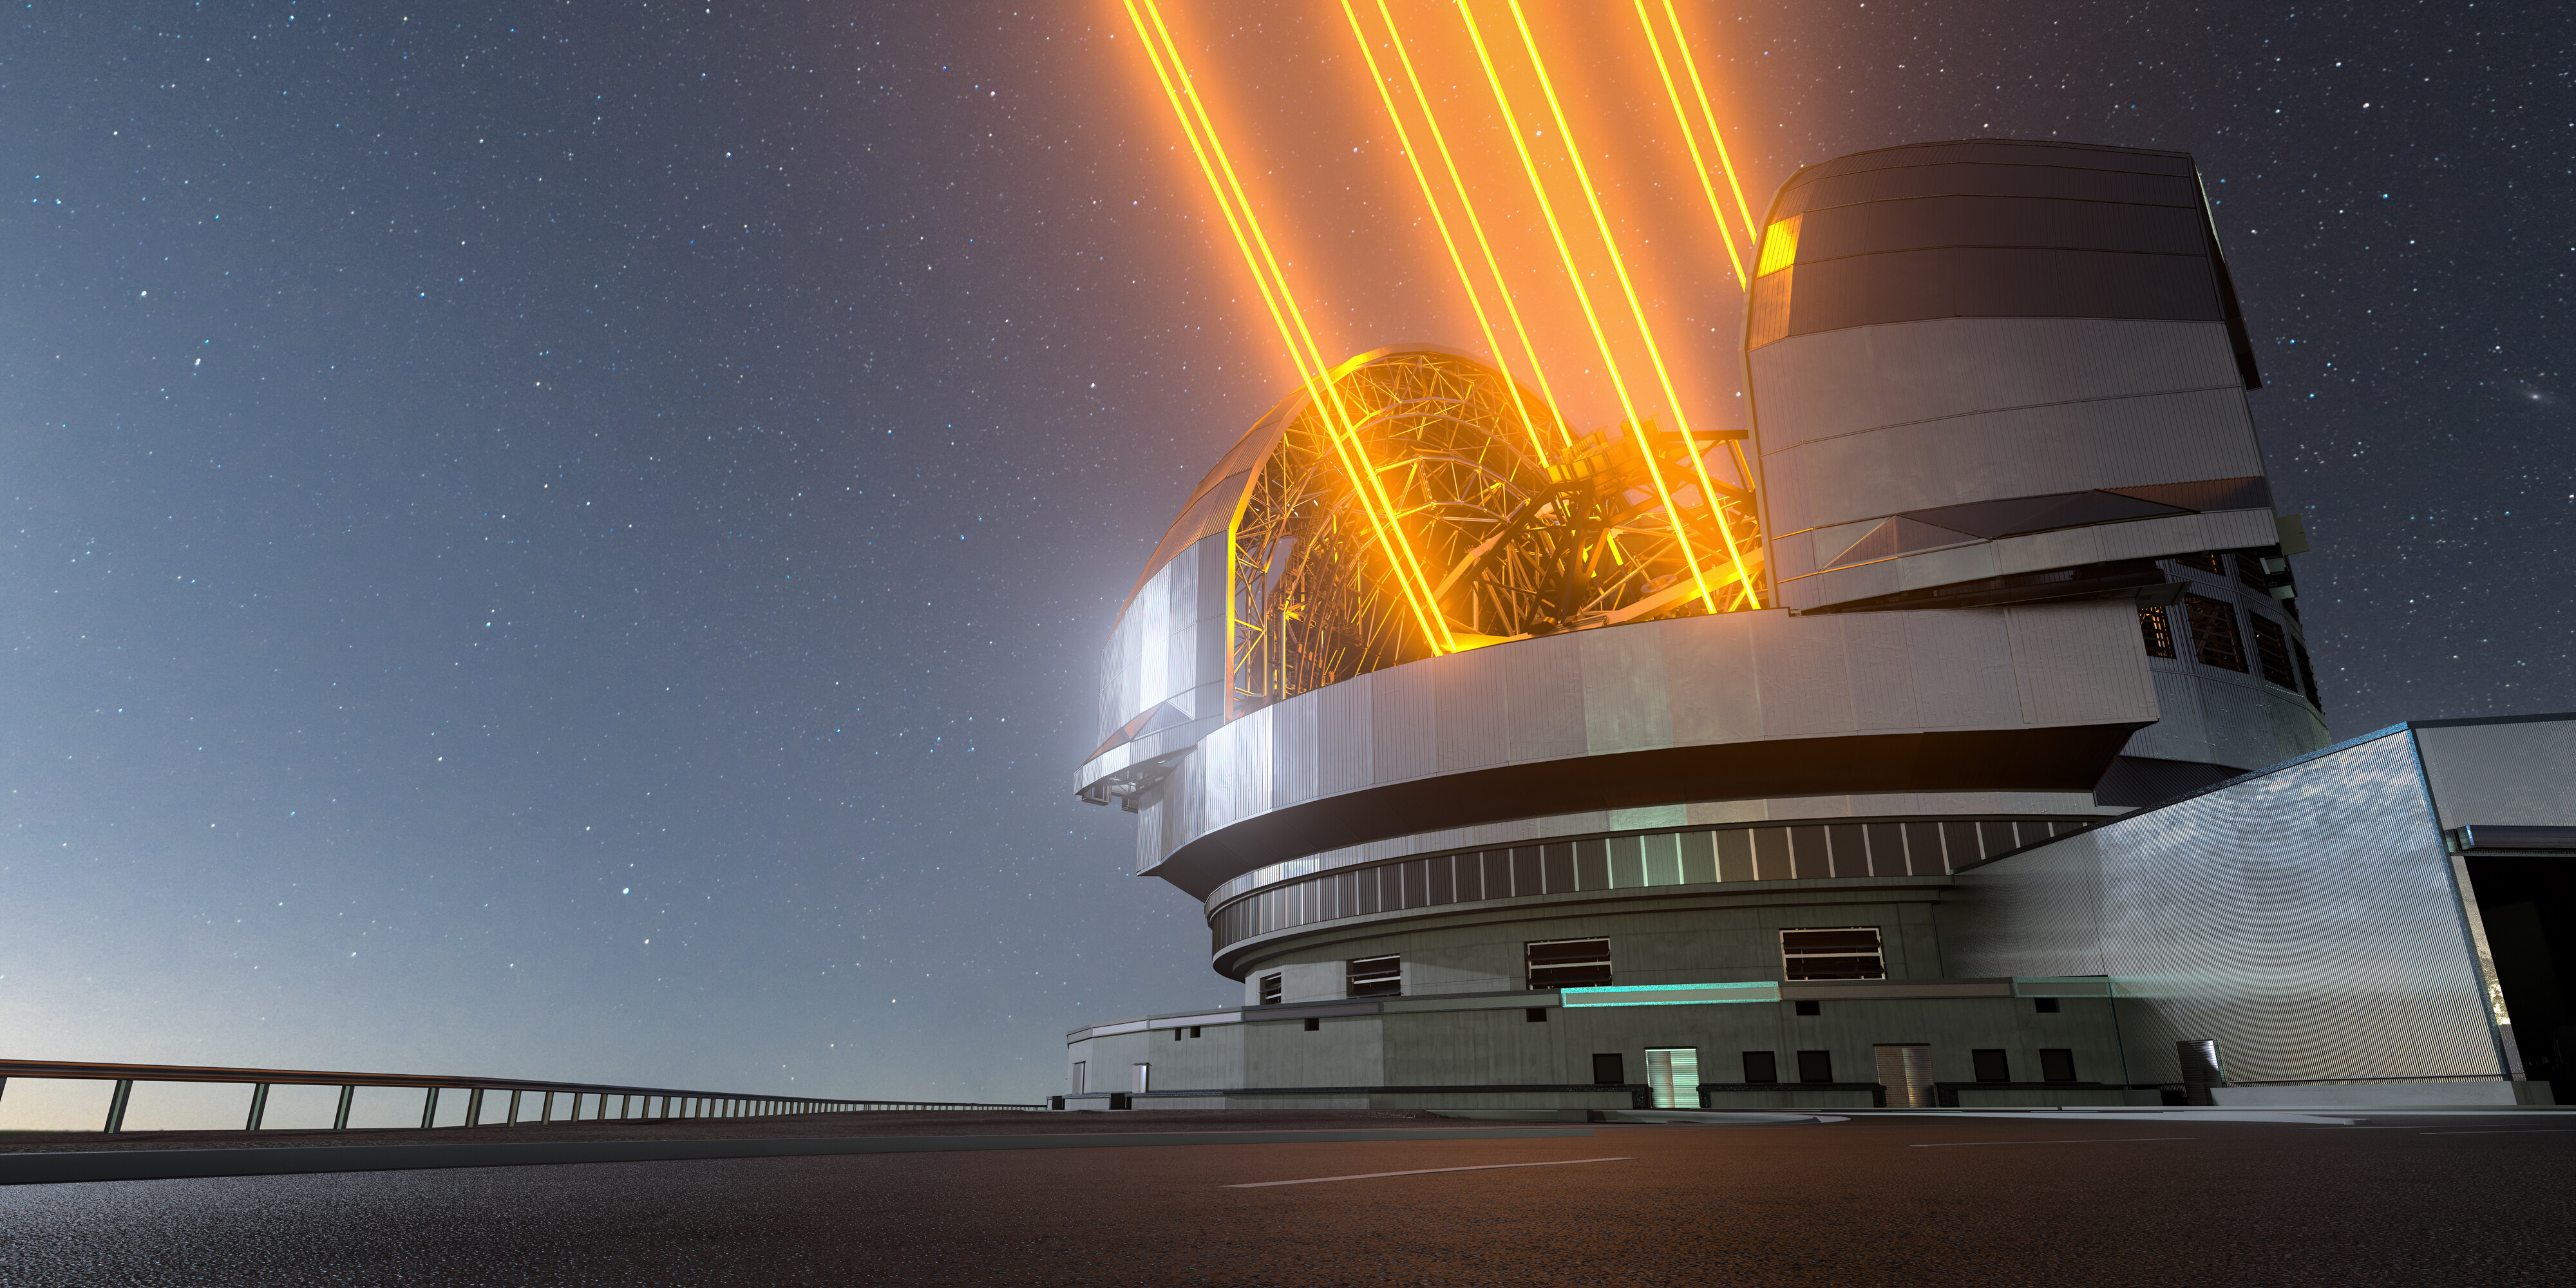 rise-of-a-giant-the-extremely-large-telescope-the-royal-astronomical